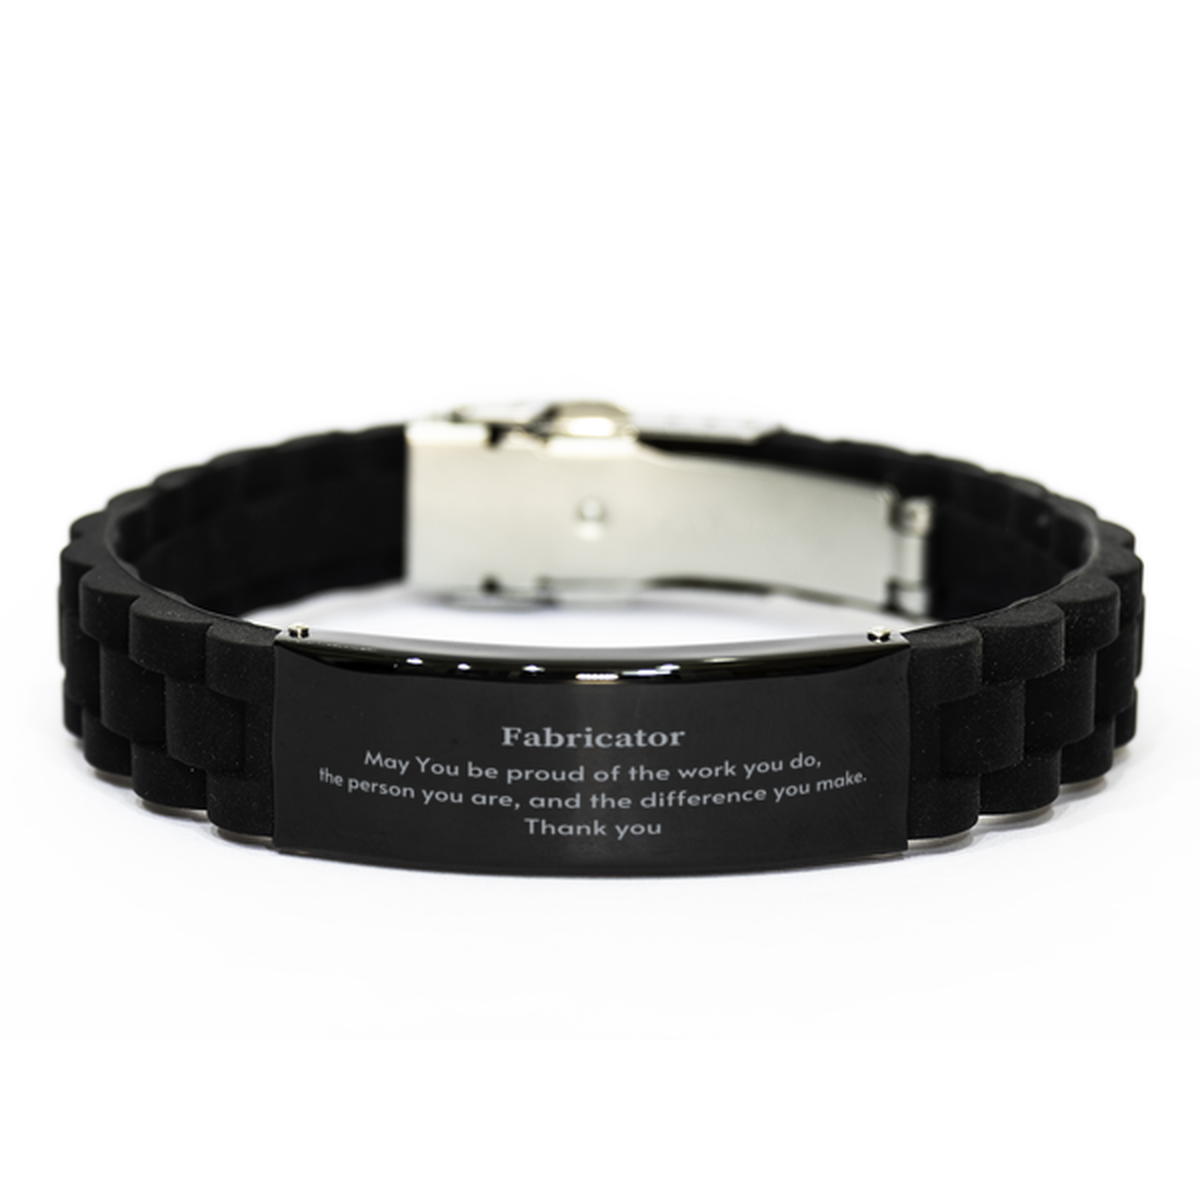 Heartwarming Black Glidelock Clasp Bracelet Retirement Coworkers Gifts for Fabricator, Fabricator May You be proud of the work you do, the person you are Gifts for Boss Men Women Friends